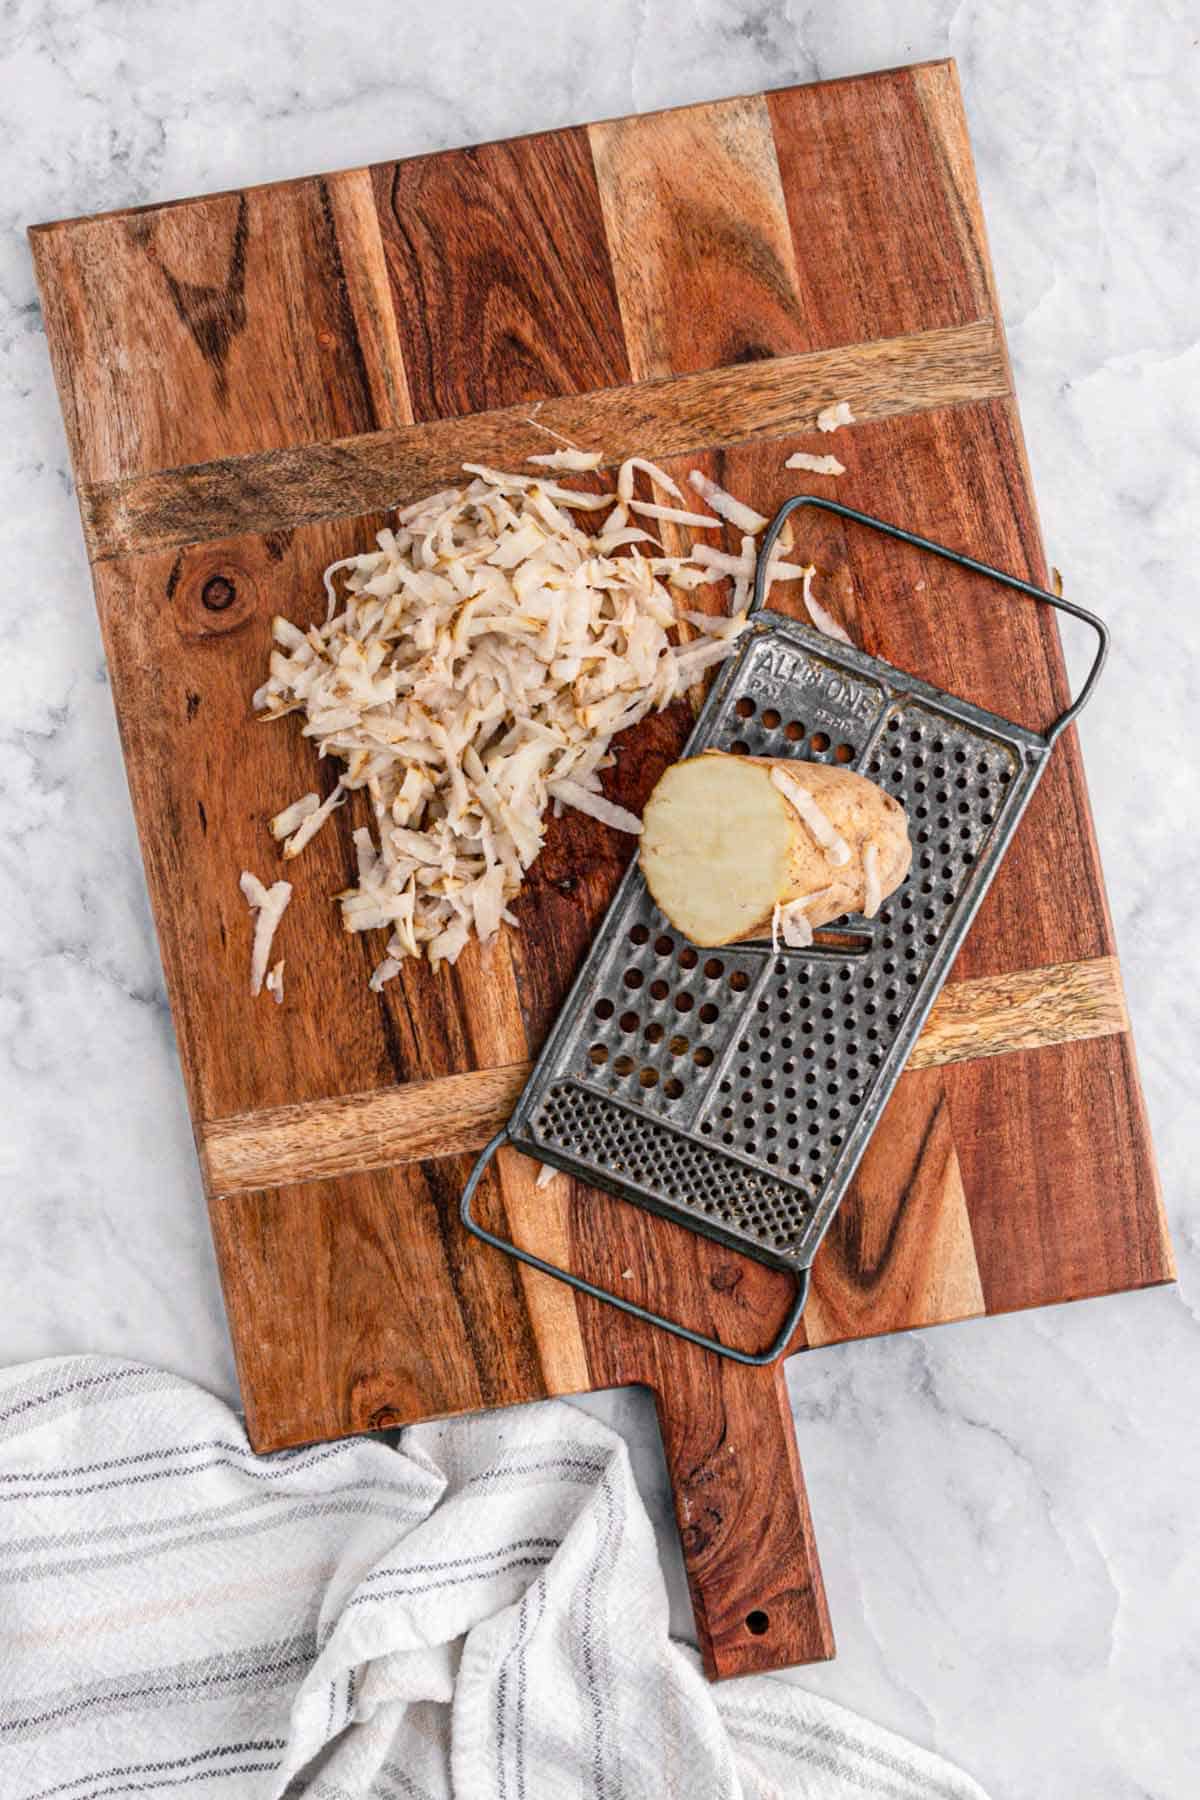 Potatoes shredded on a cutting board with a cheese grater next to it.